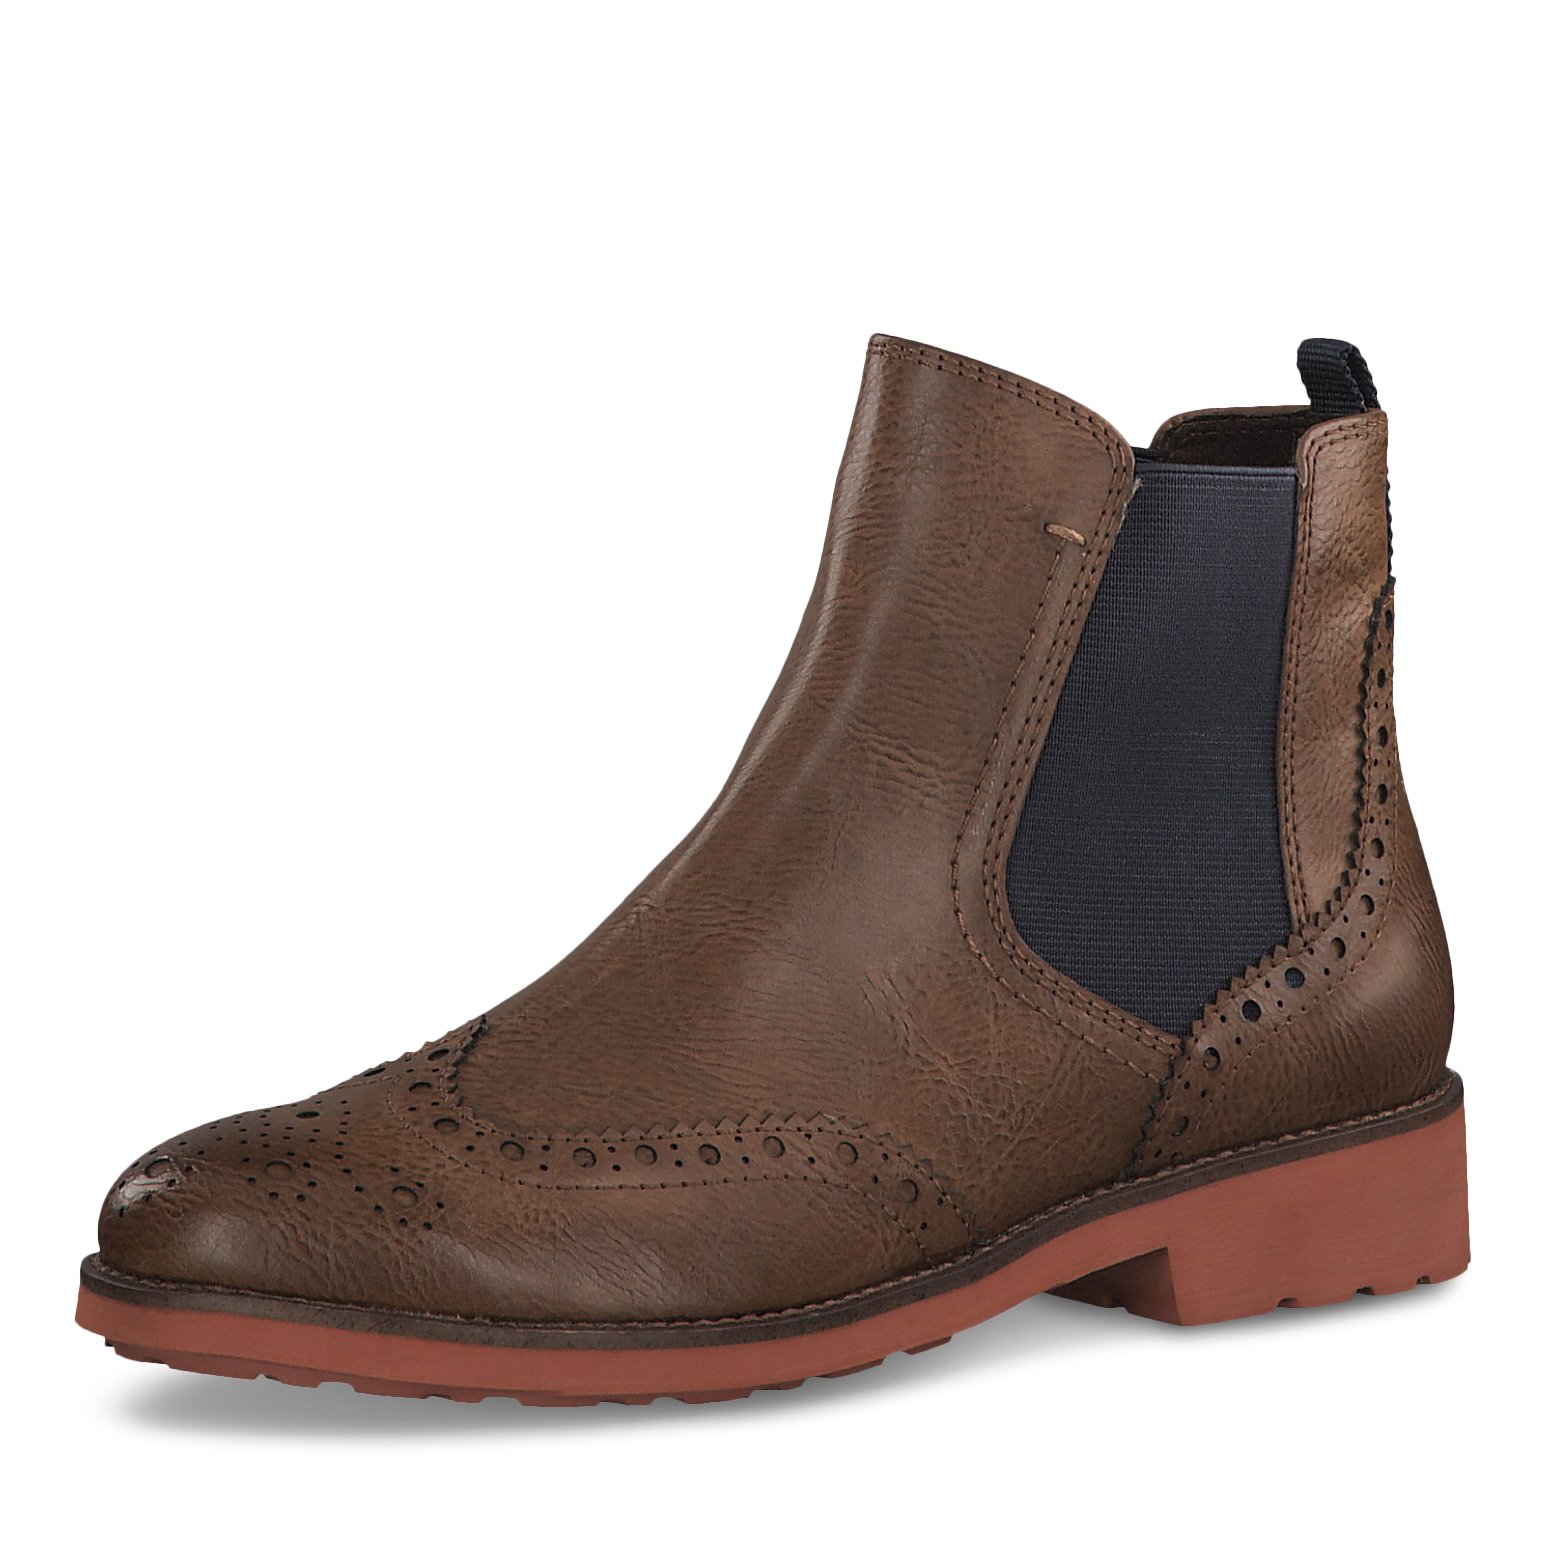 Chelsea boot 2-2-25410-33: Buy from Marco Tozzi online!